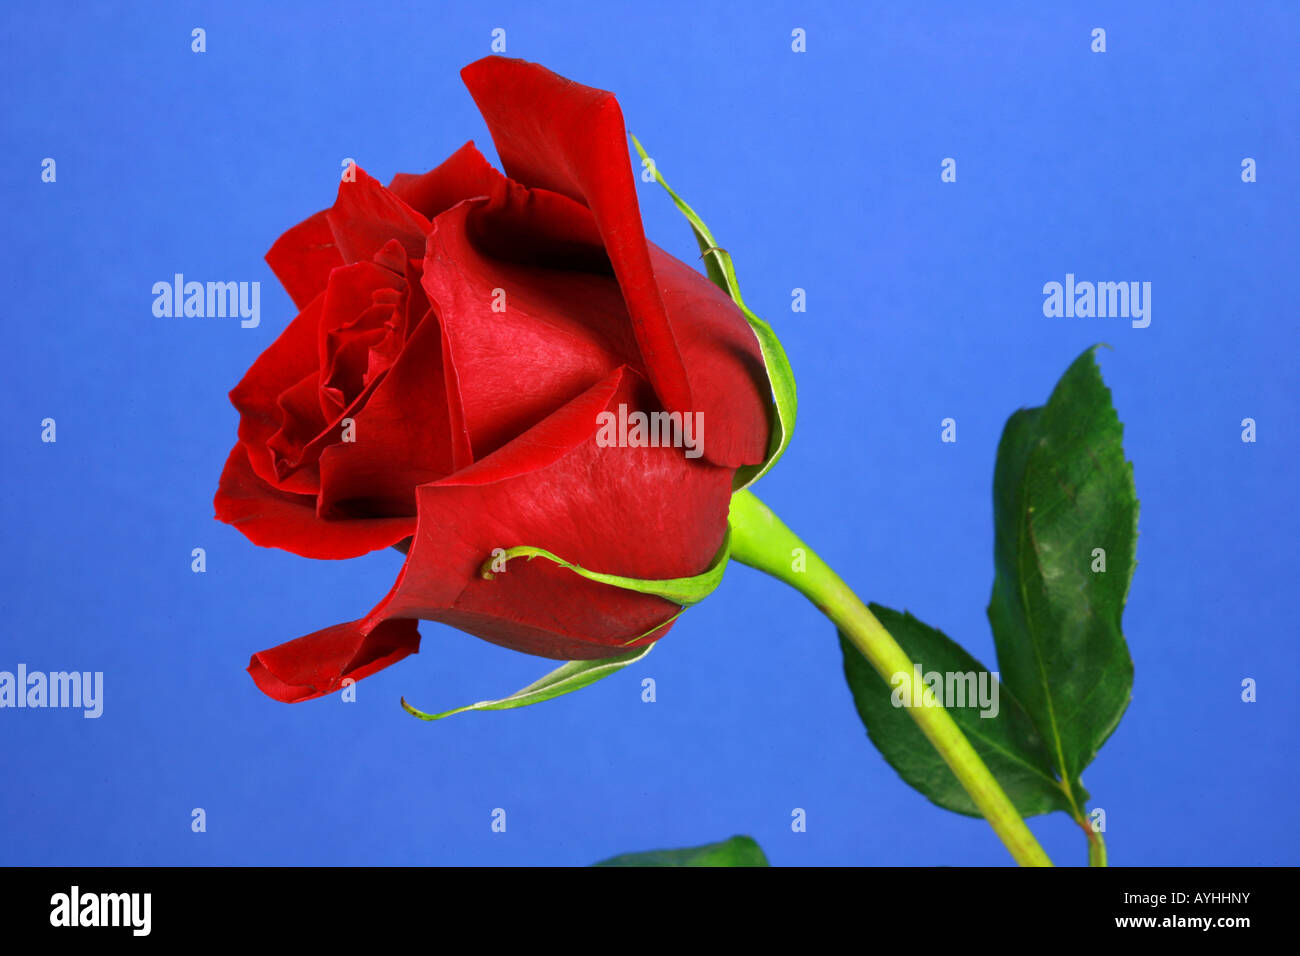 Single stem bright red rose with green leaves and blue cut out background Stock Photo